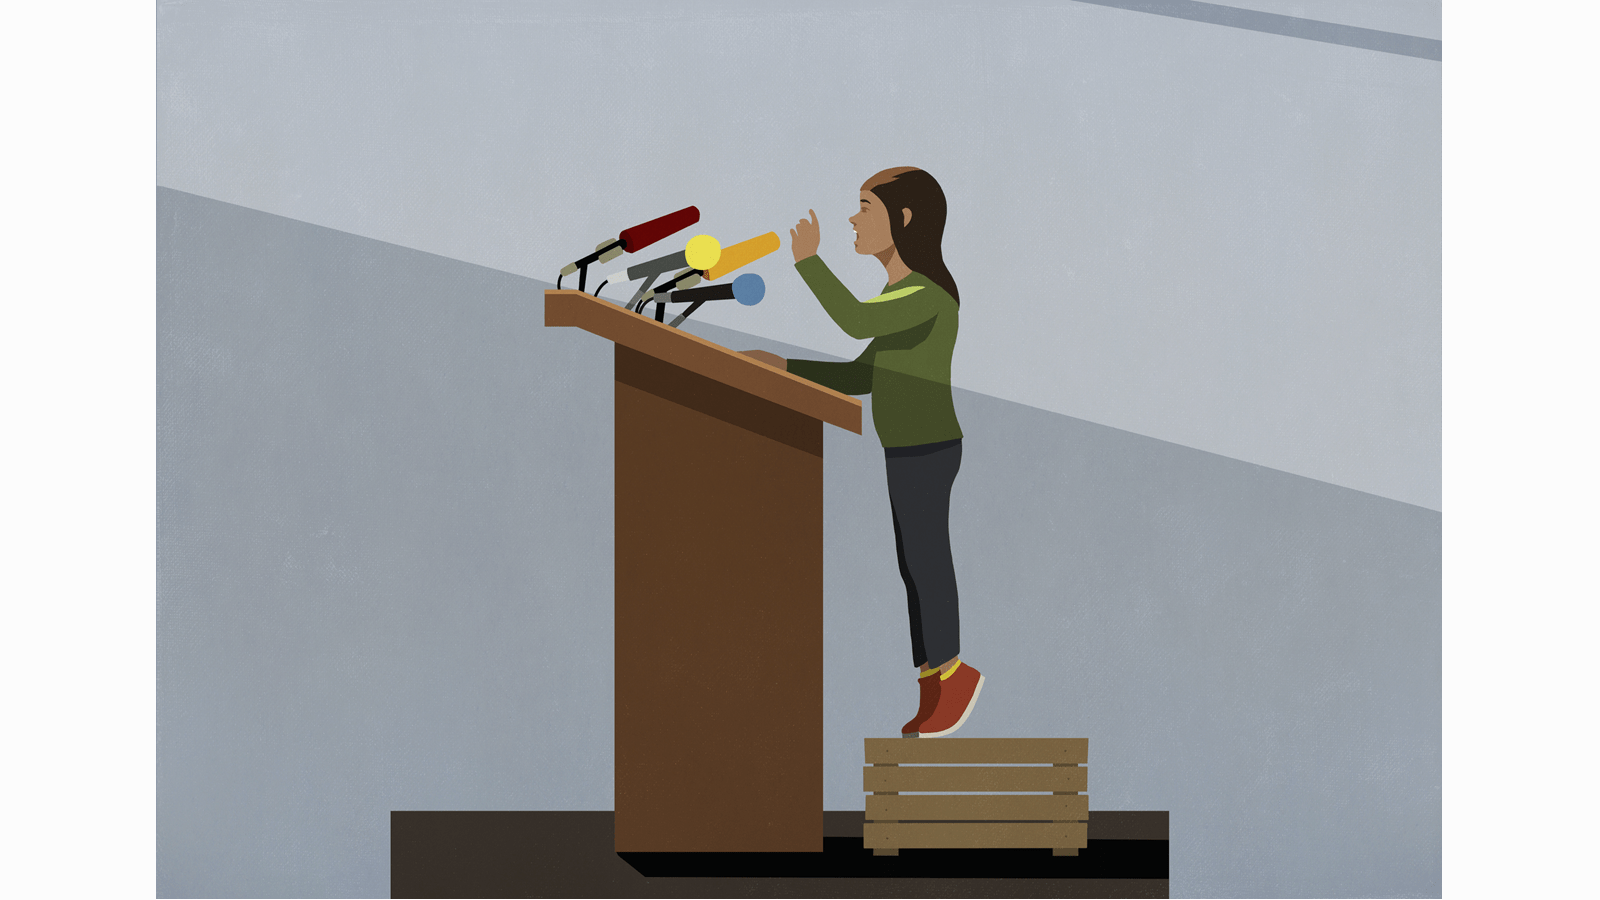 Illustration of a small person standing at a podium